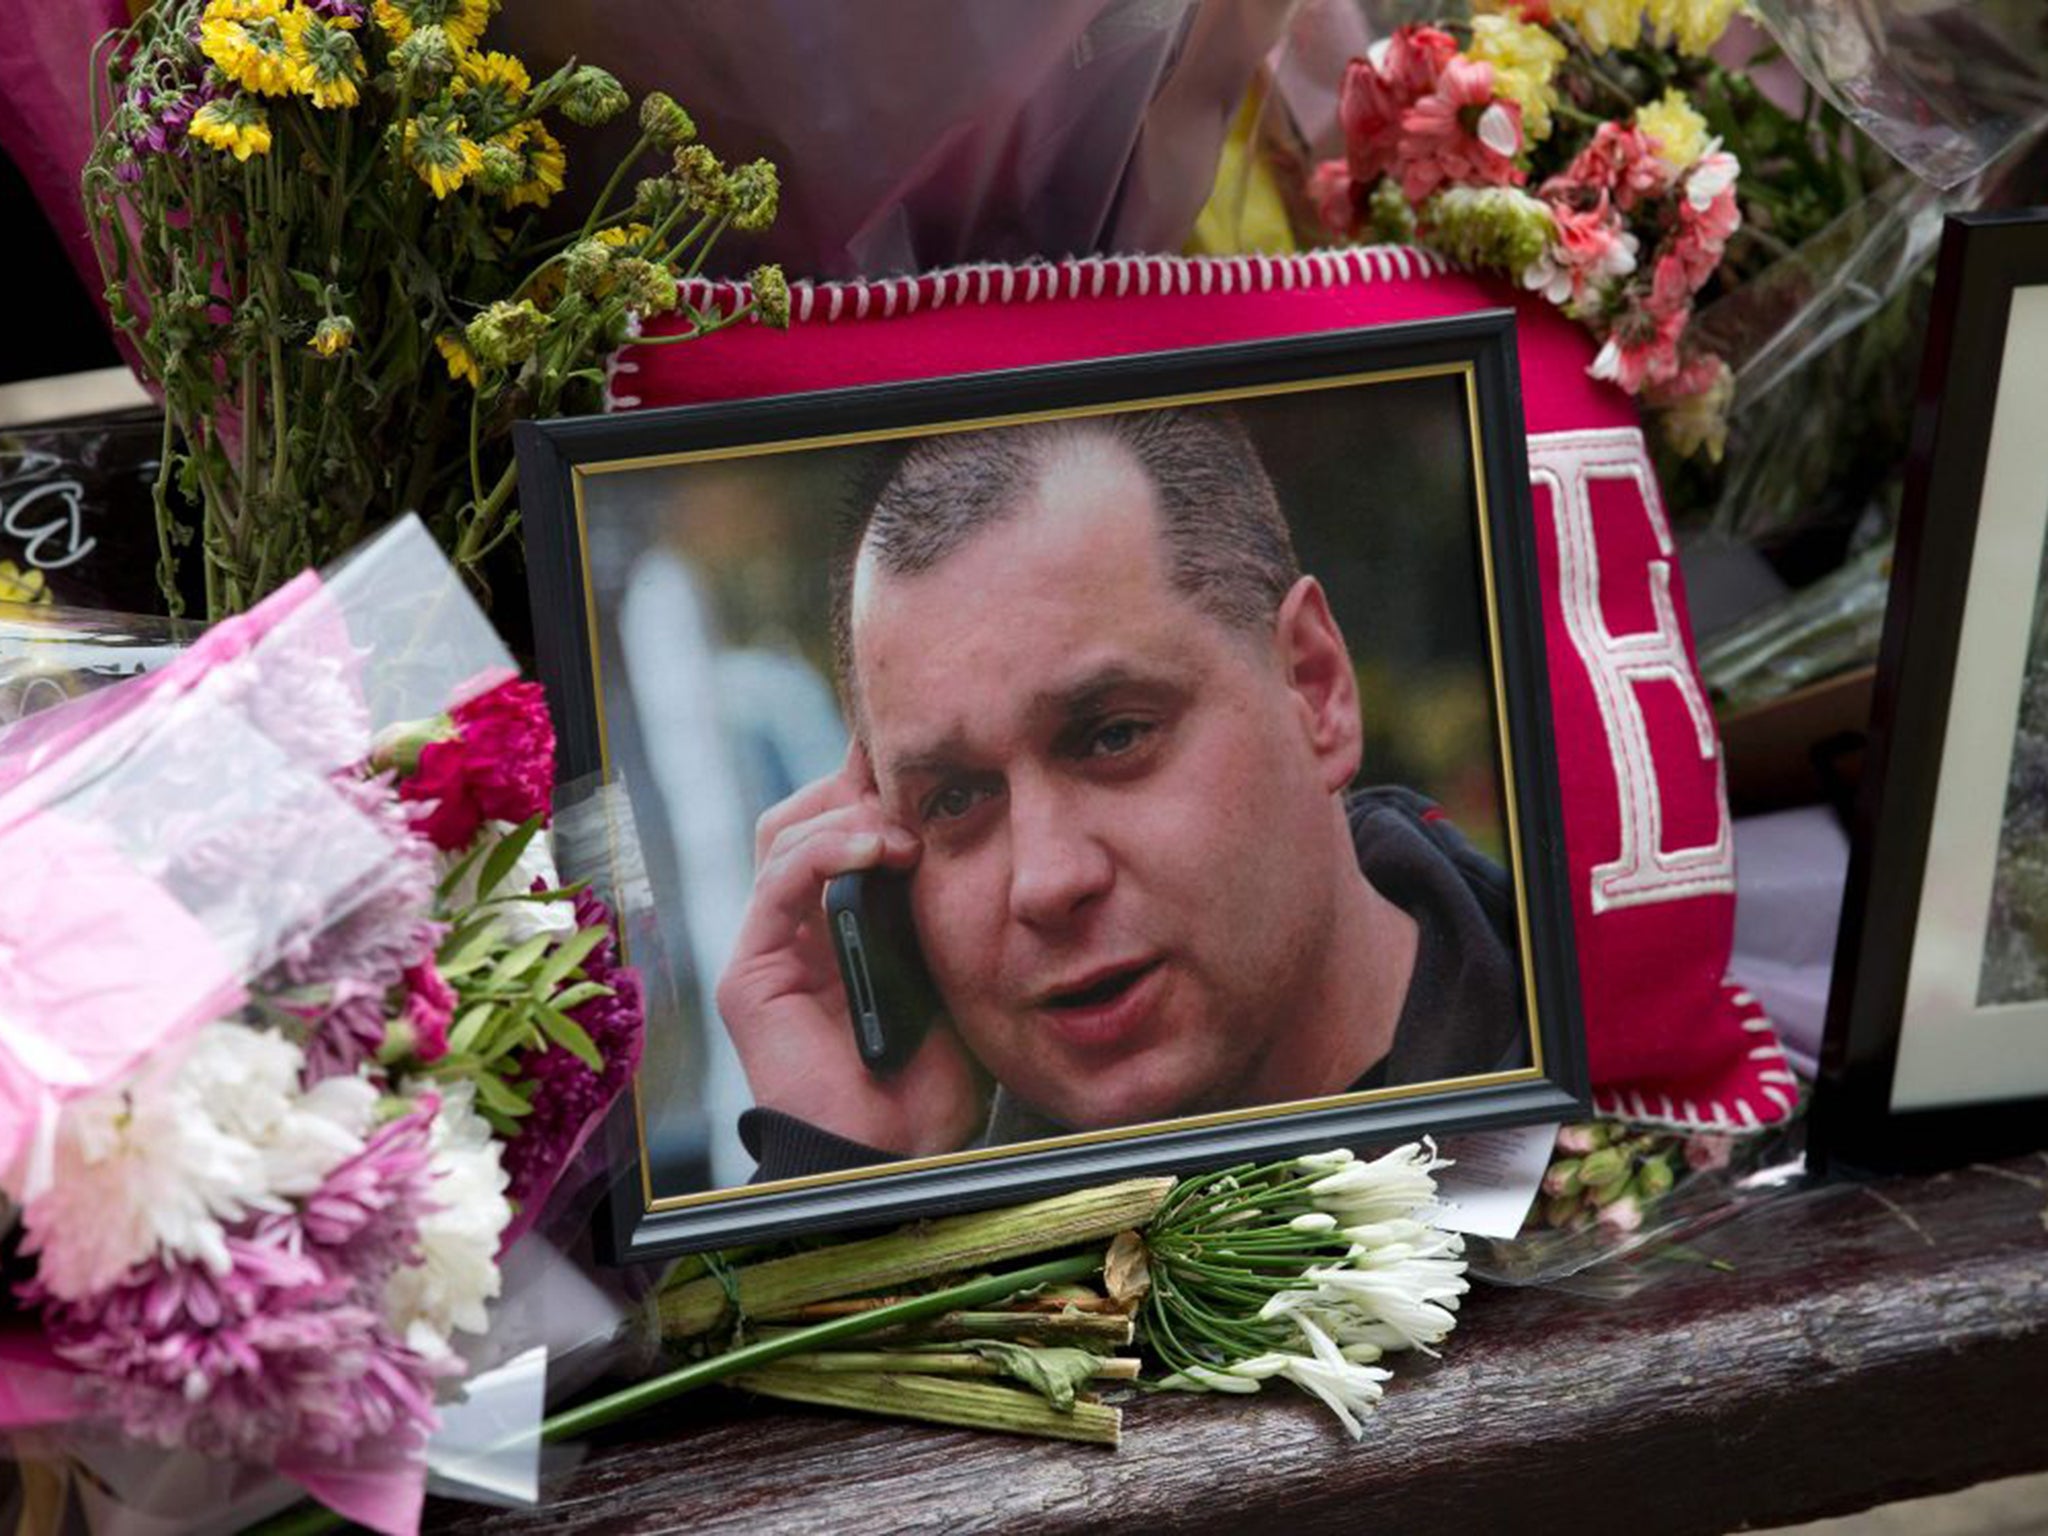 A photo of Arek Jozwik amid floral tributes left near the spot where he was fatally injured